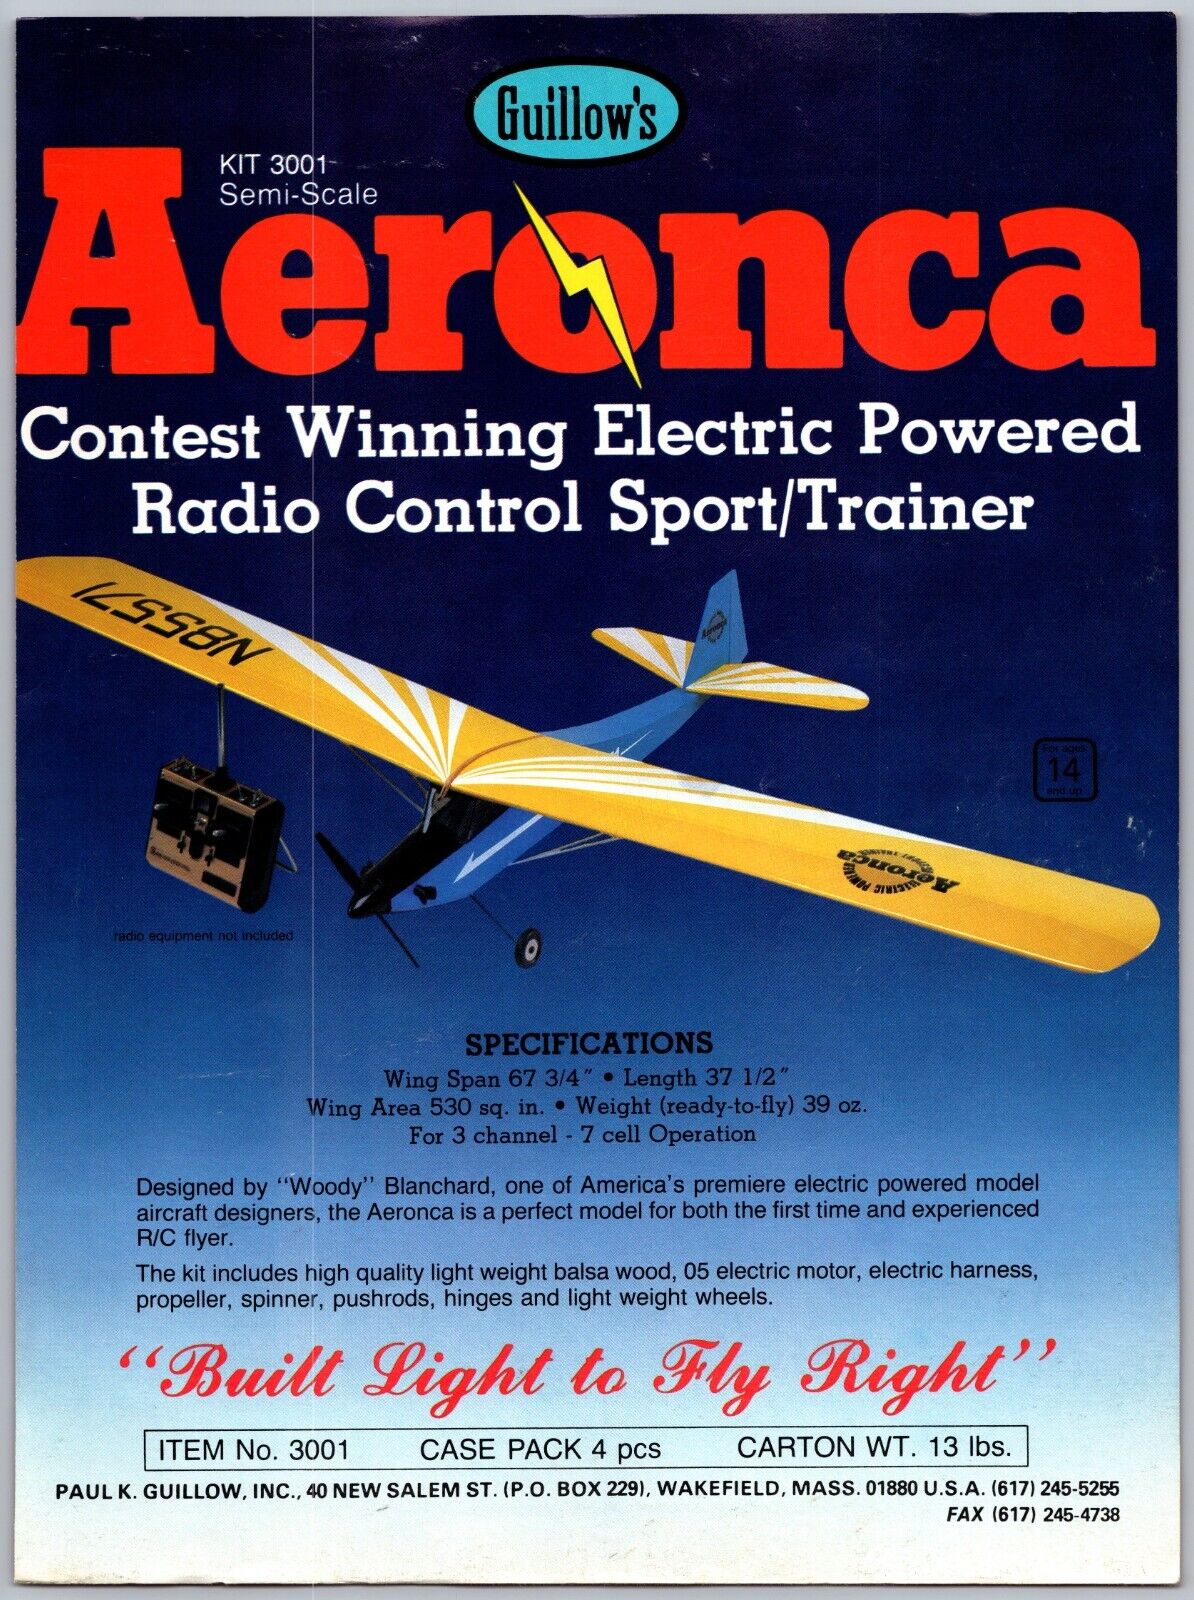 Guillow\'s Aeronca Electric Powered Trainer Vintage April 1989 Full Page Print Ad